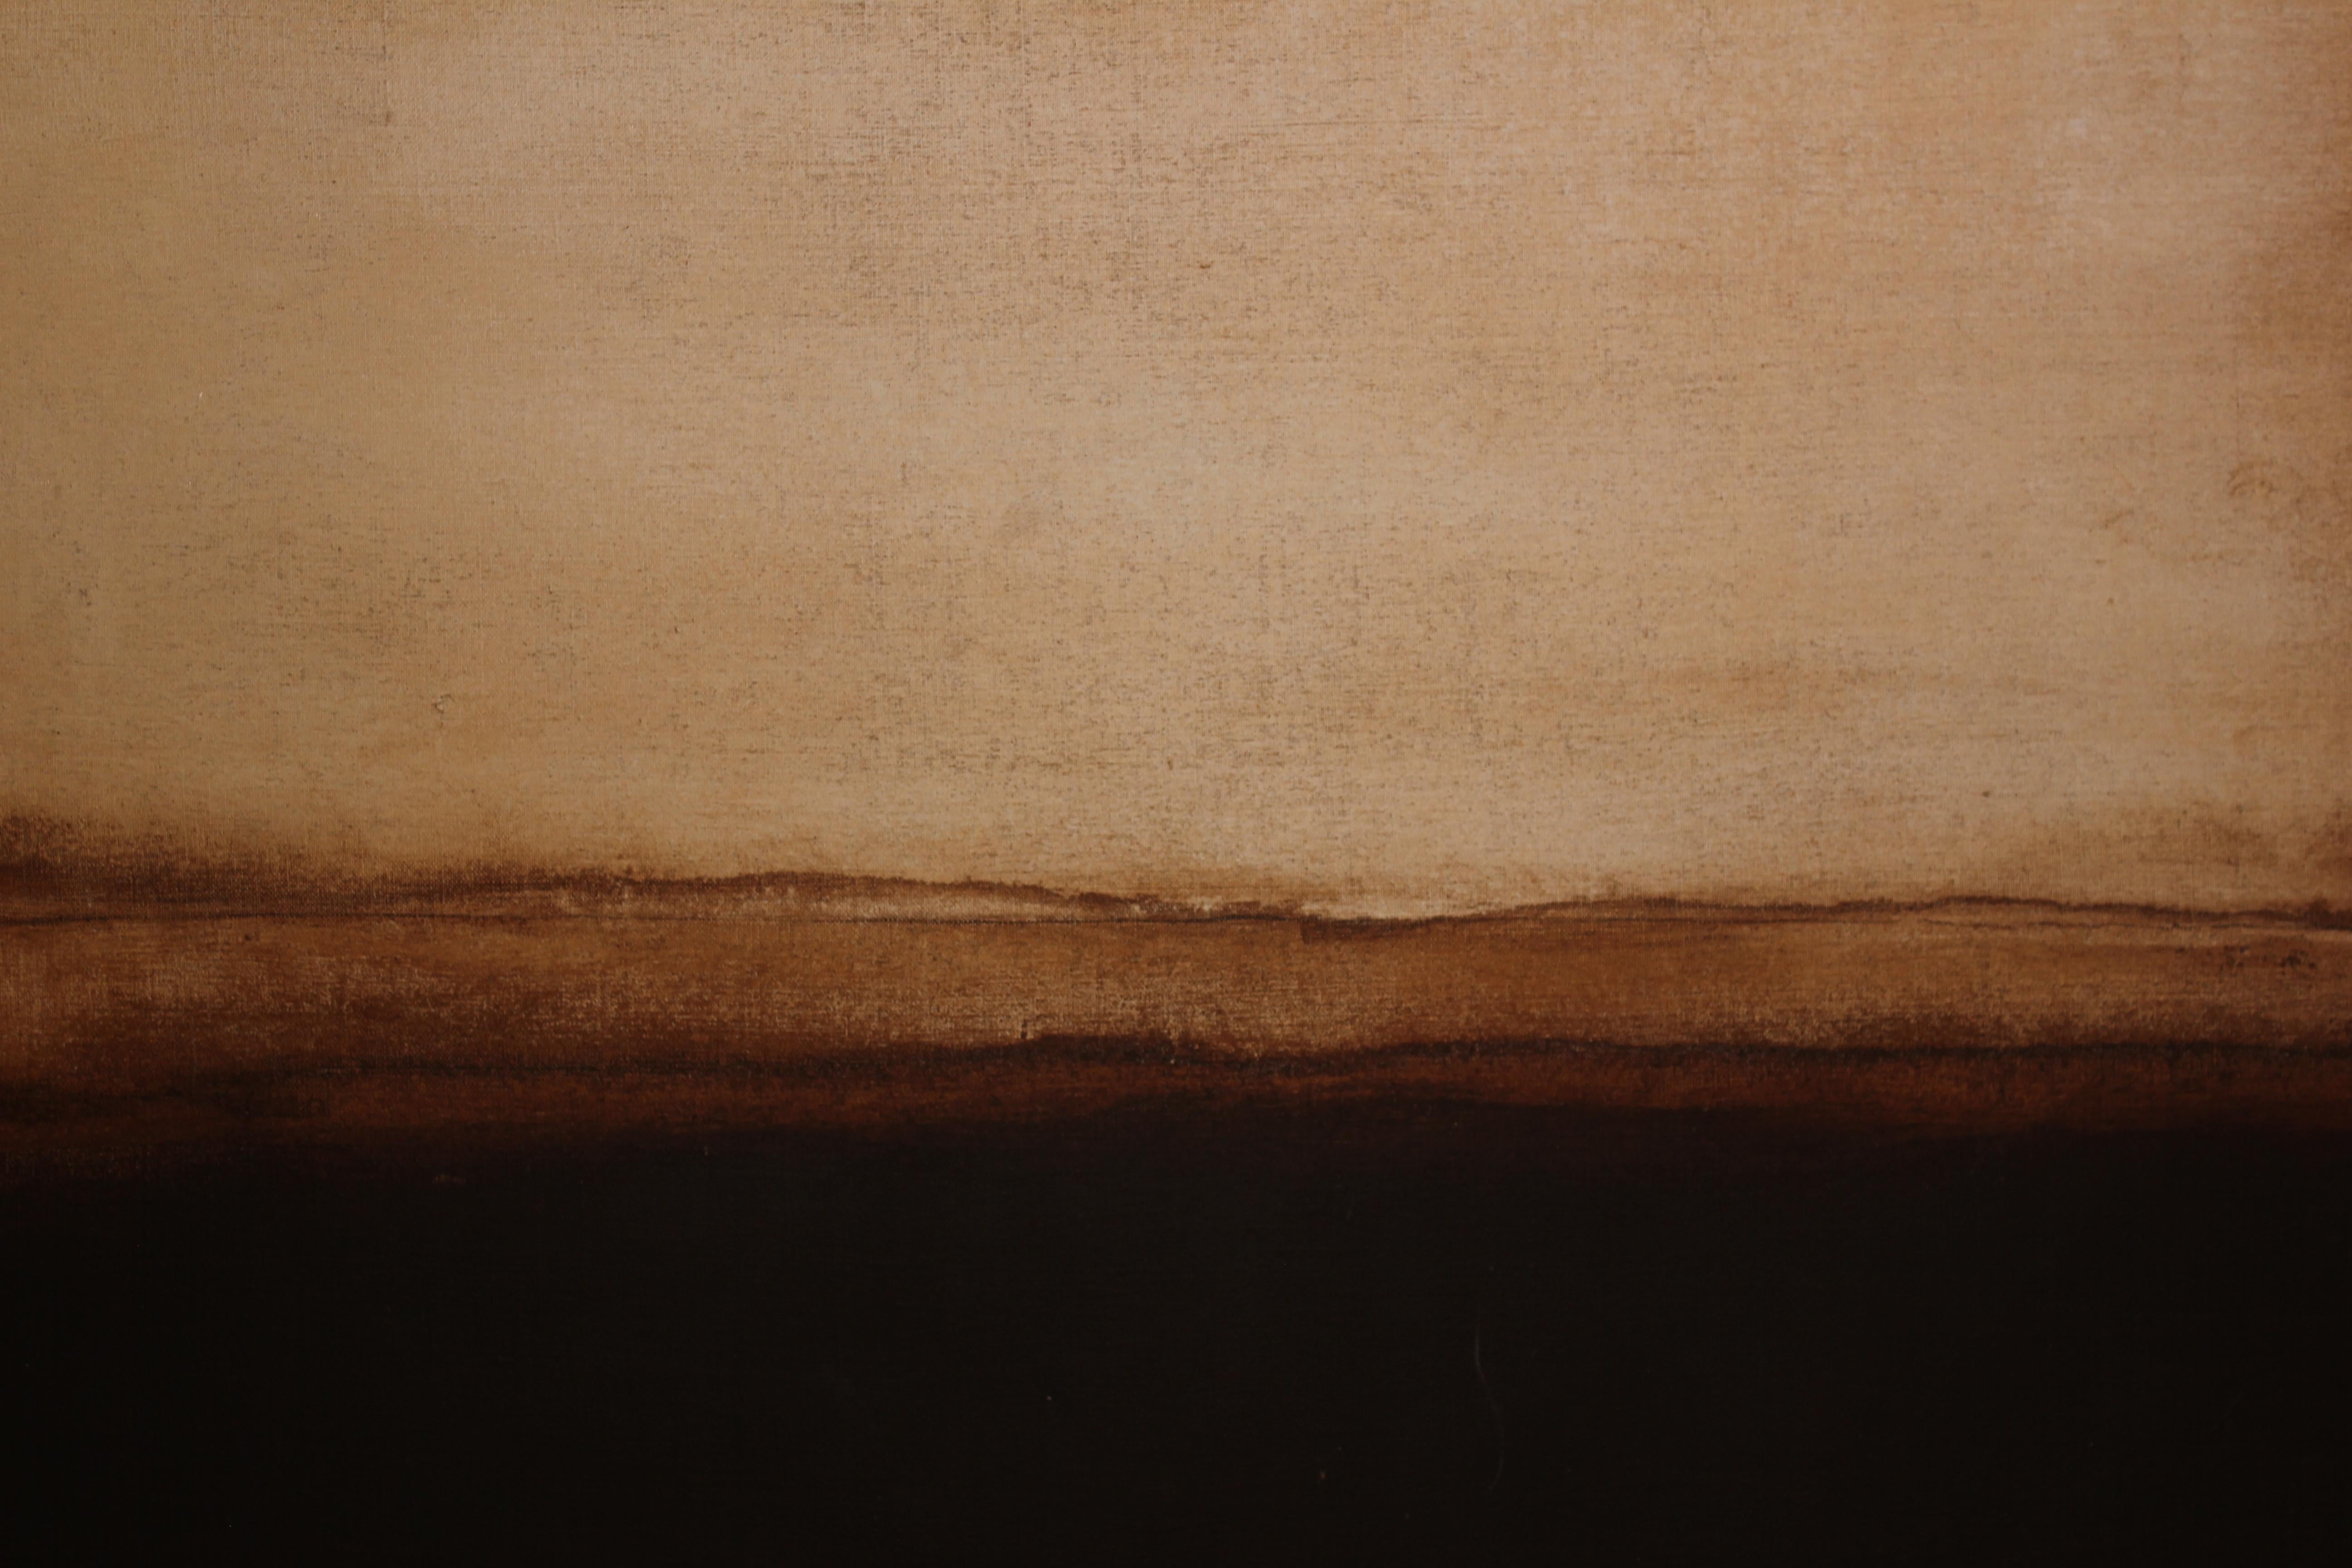 Contemporary Minimal Earth Tonal Landscape with a Red Sun or Moon - Painting by Ladis Pietros